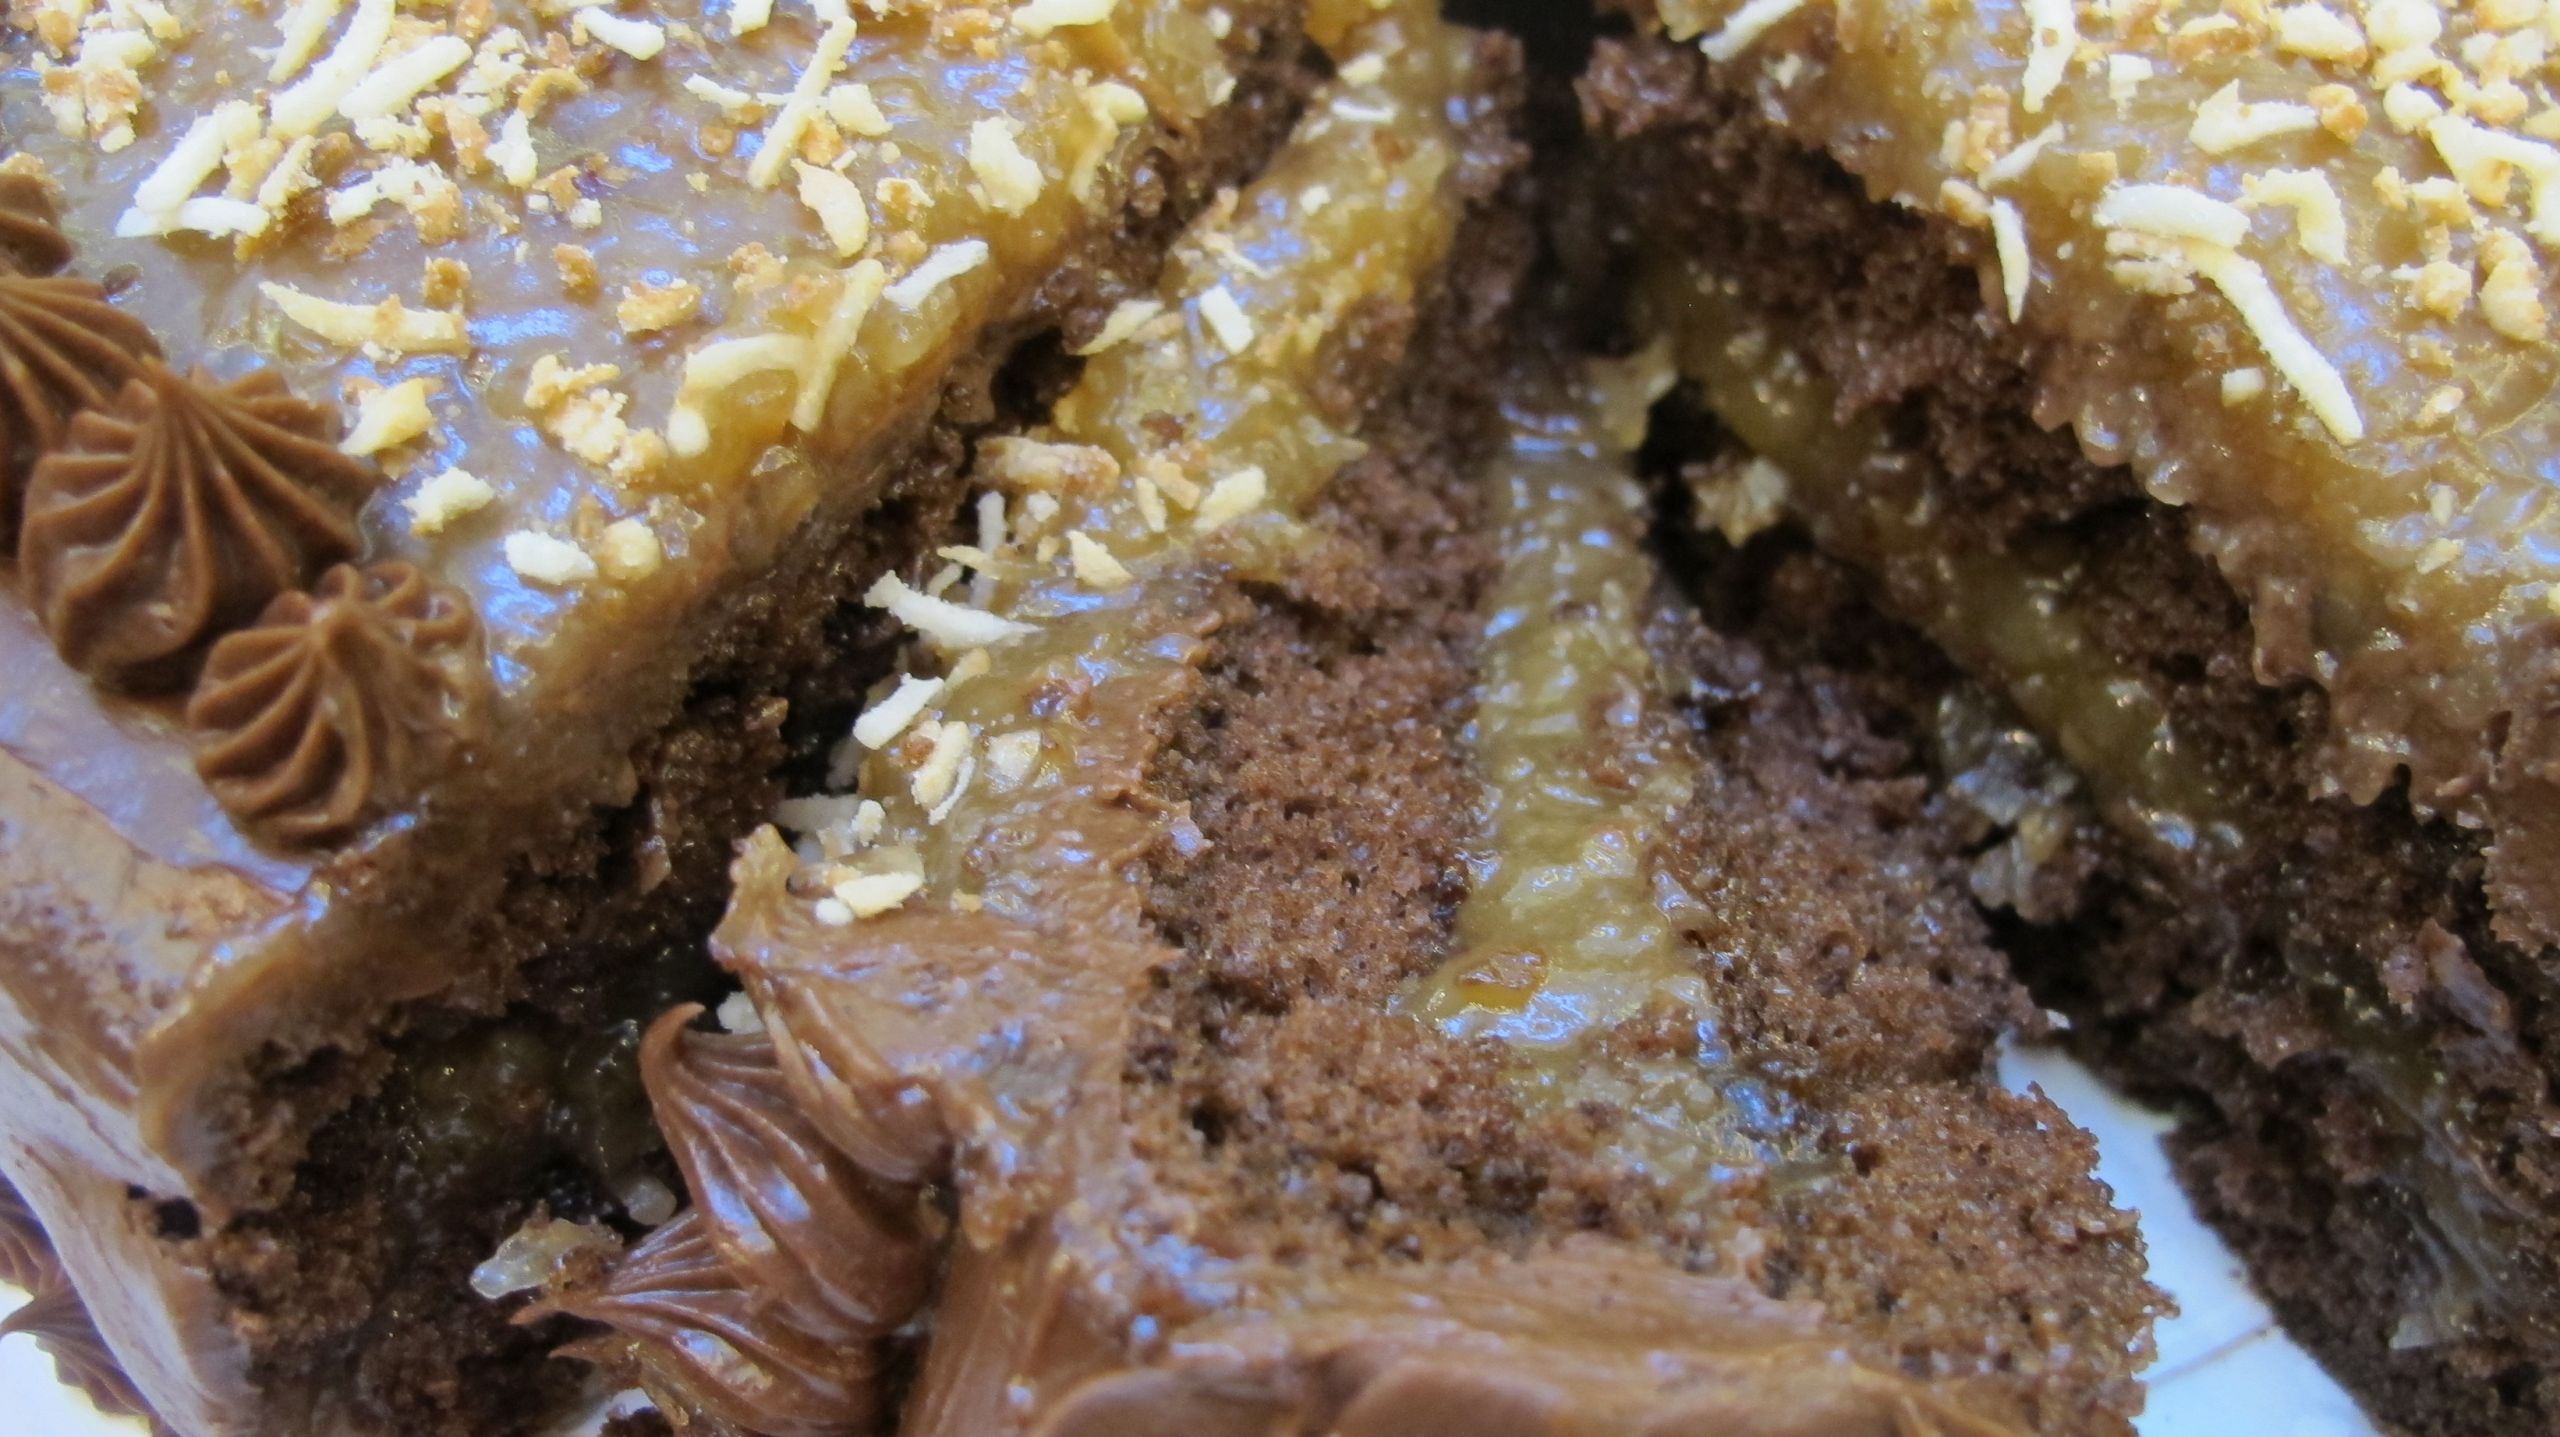 Paula Deen Yellow Cake With Chocolate Frosting
 GERMAN CHOCOLATE CAKE PAULA DEEN Durmes Gumuna